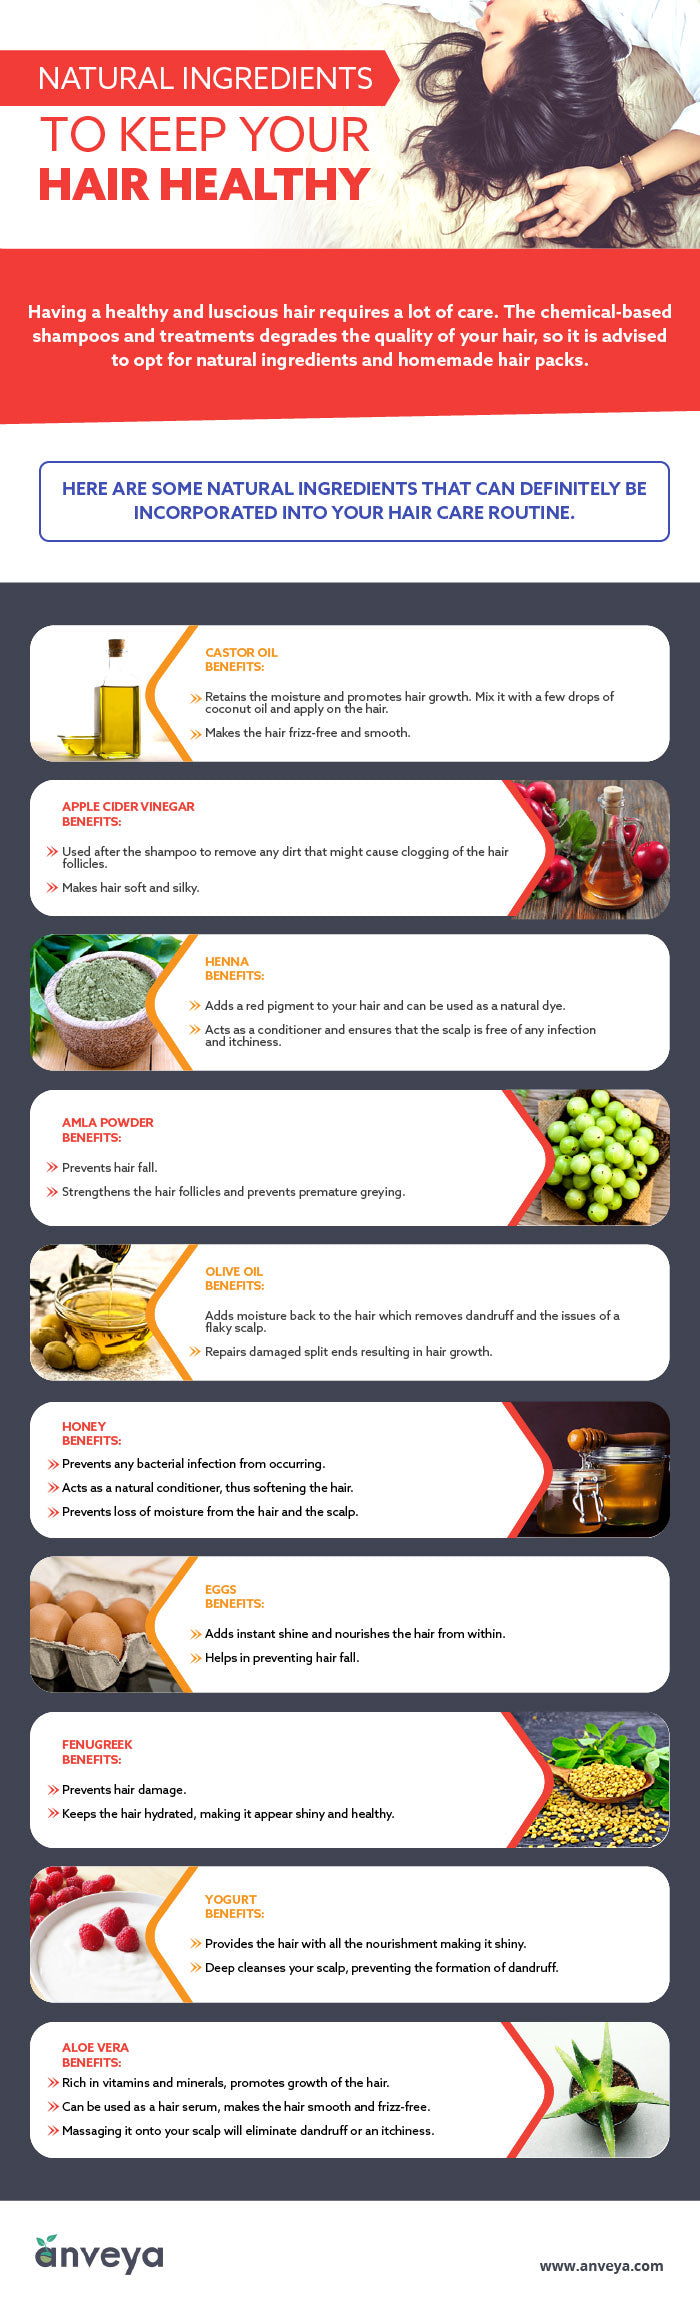 Natural Ingredients to Keep Your Hair Healthy (Infographic)